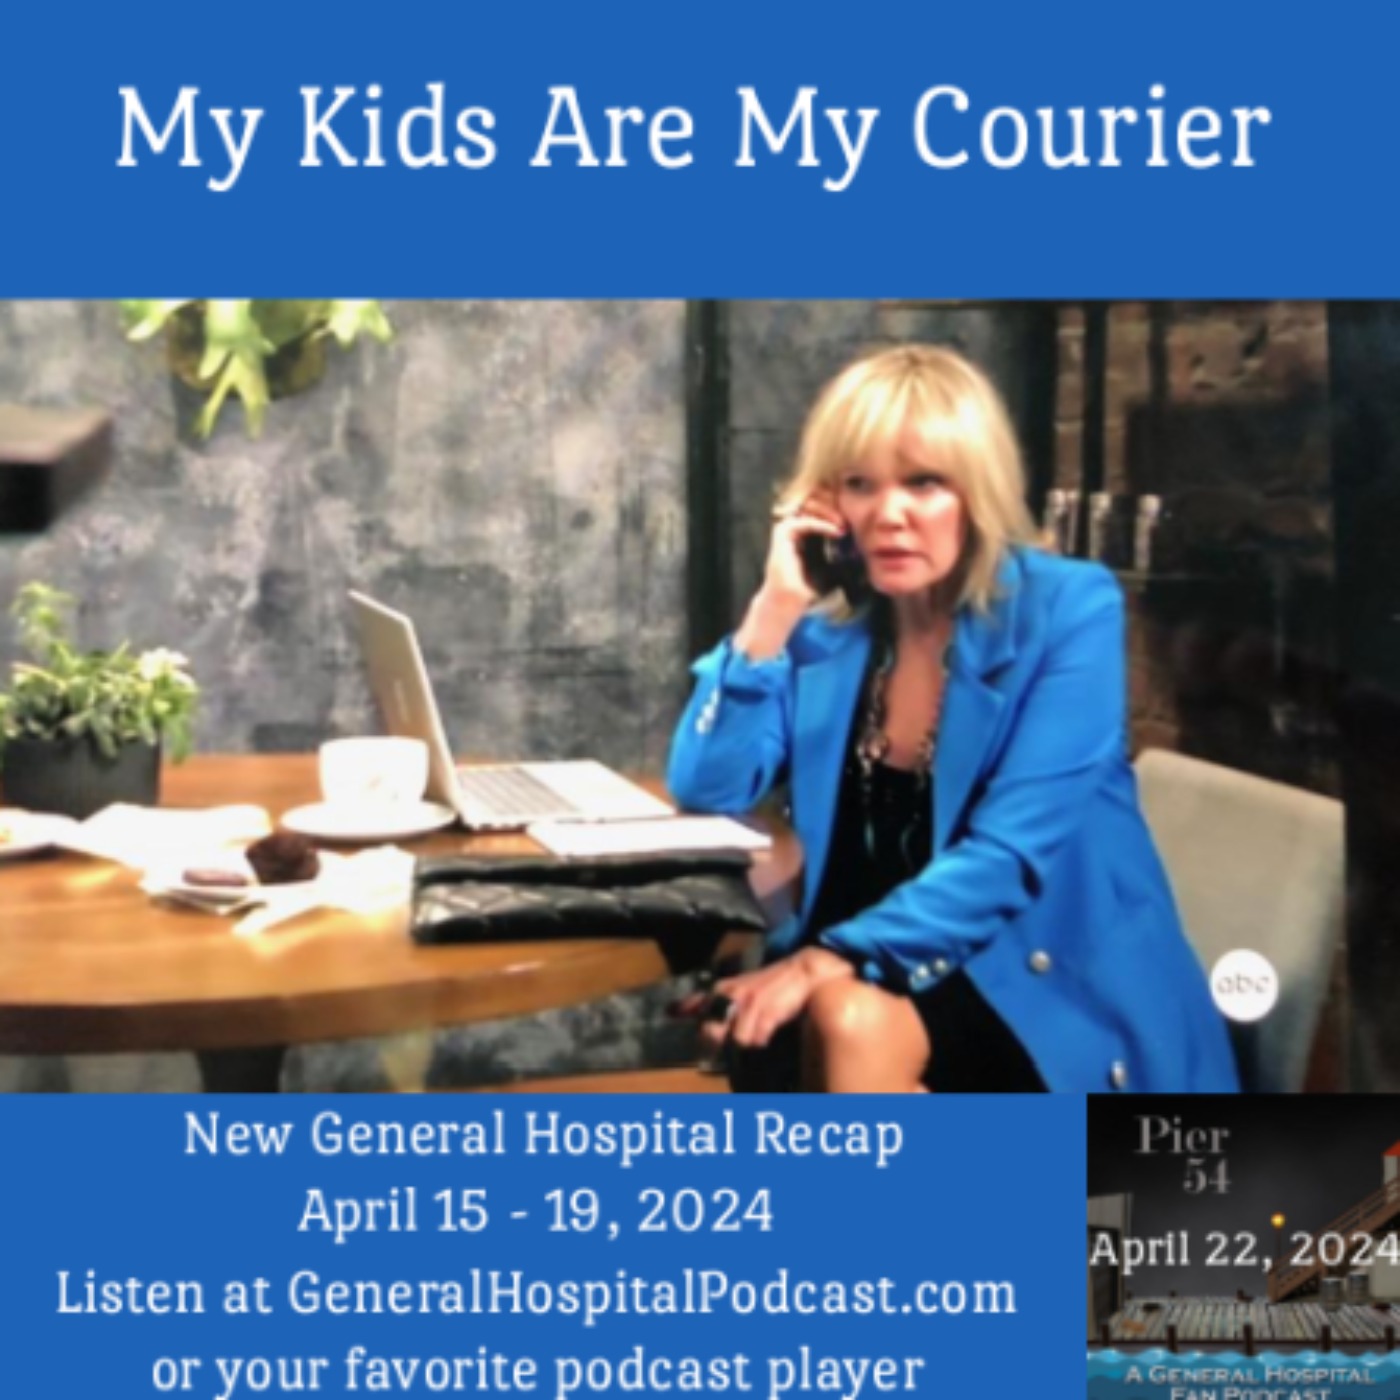 Episode 537: My Kids Are My Courier 4/22/24